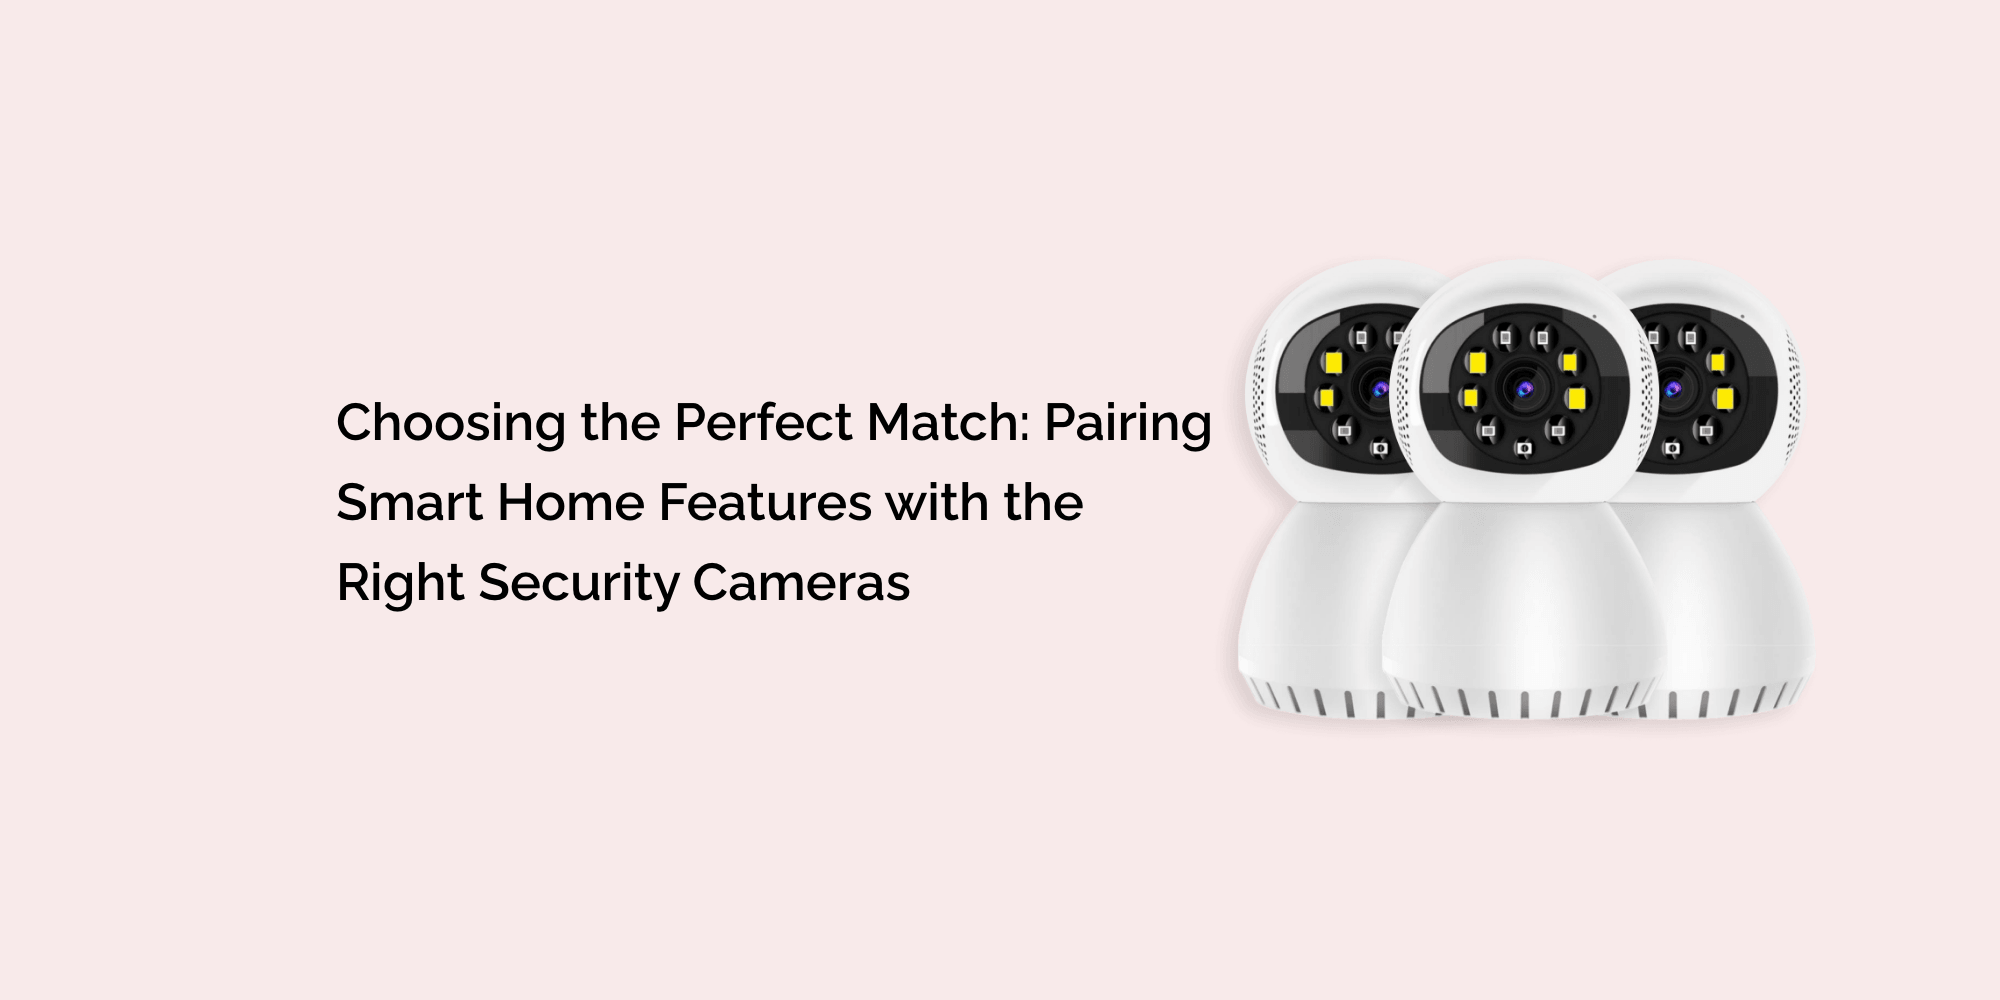 Choosing the Perfect Match: Pairing Smart Home Features with the Right Security Cameras